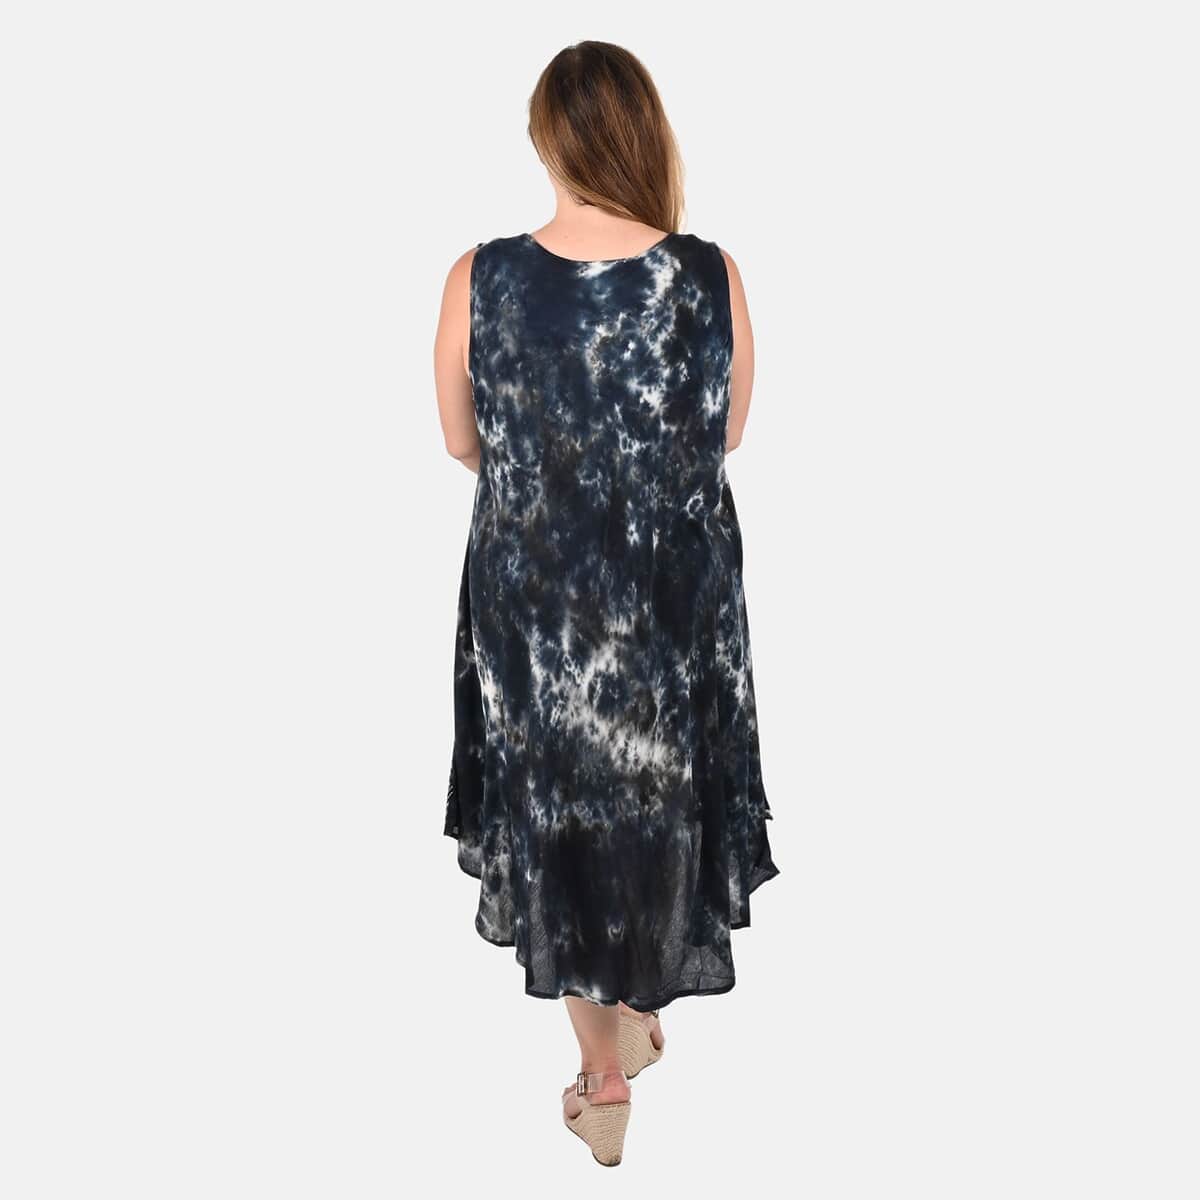 Tamsy Black and White Tie Dye Print Umbrella Dress (One Size Plus) image number 1